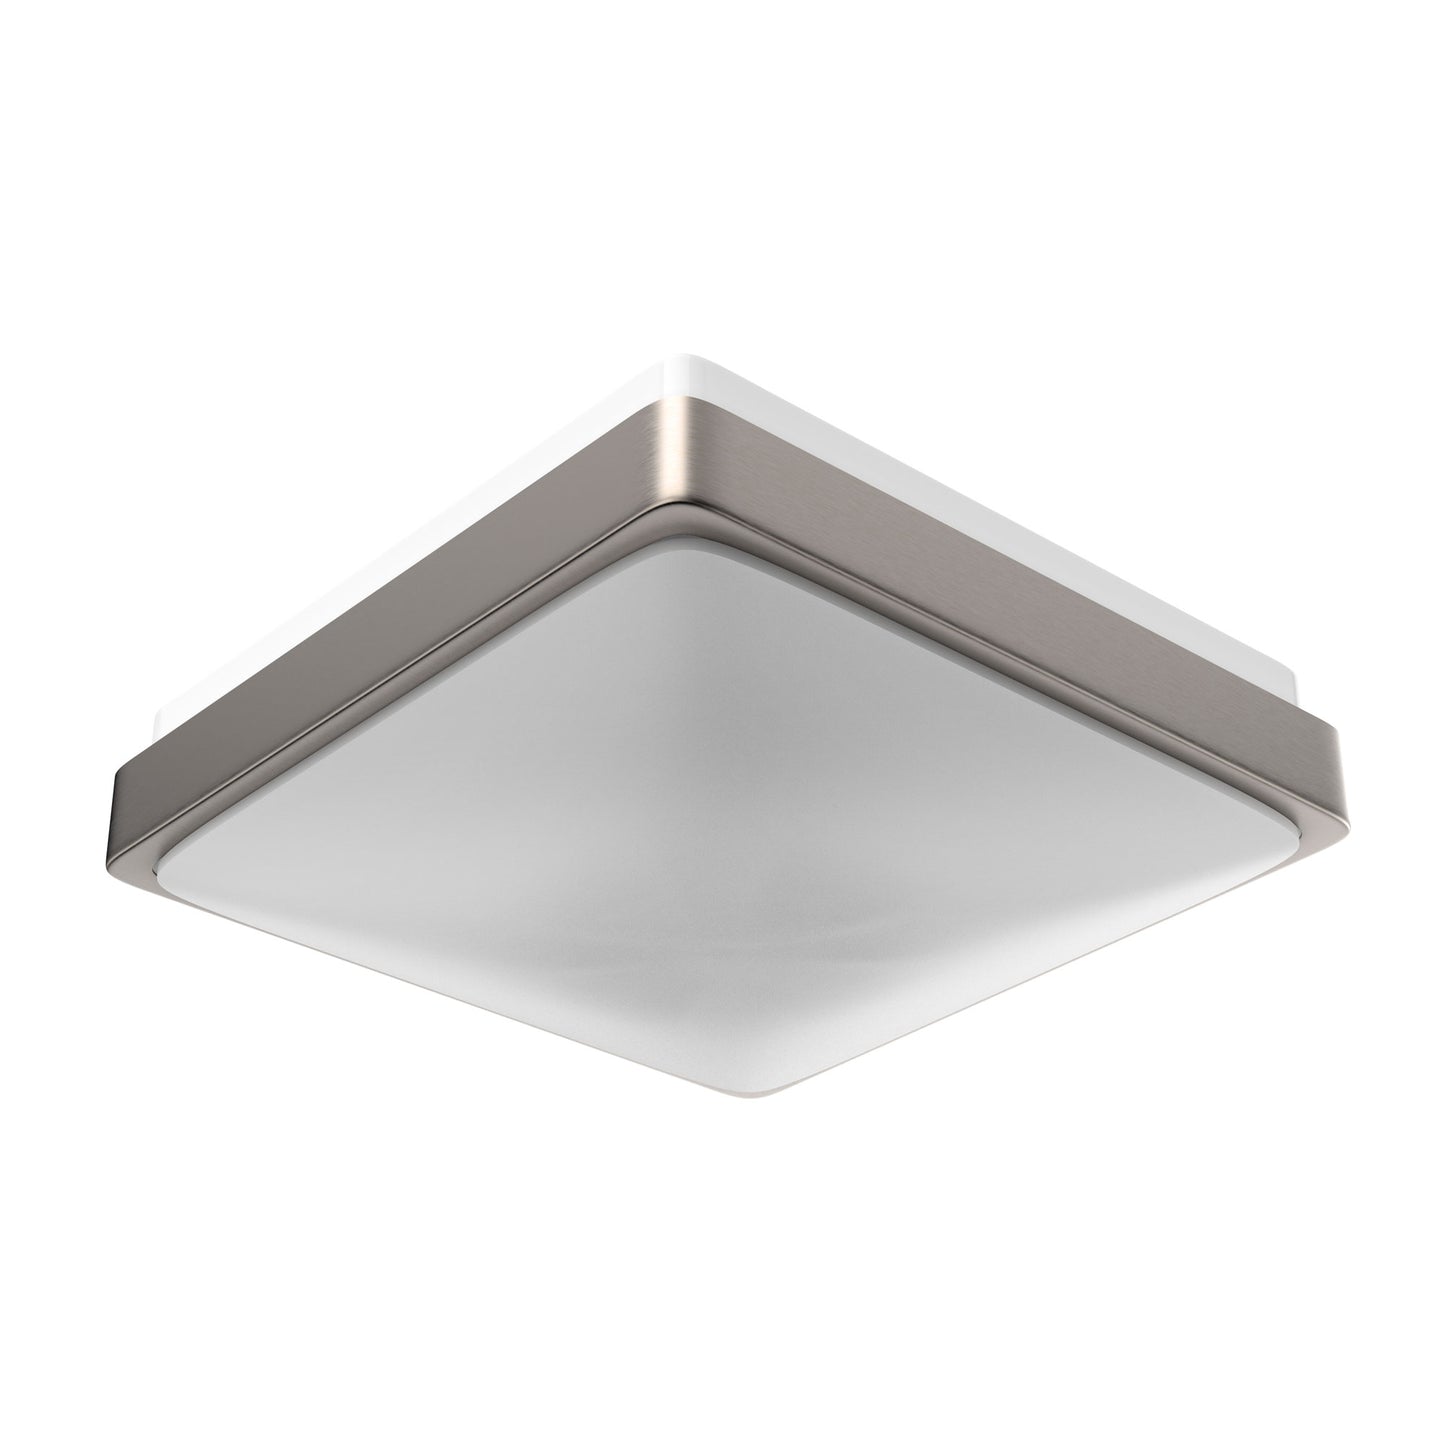 11 in. Square Single Ring Flush Mount Ceiling Light, 1050LM, Power 15W, AC120V, 4000K Dimmable Brushed Nickel, Hallway Light Fixture